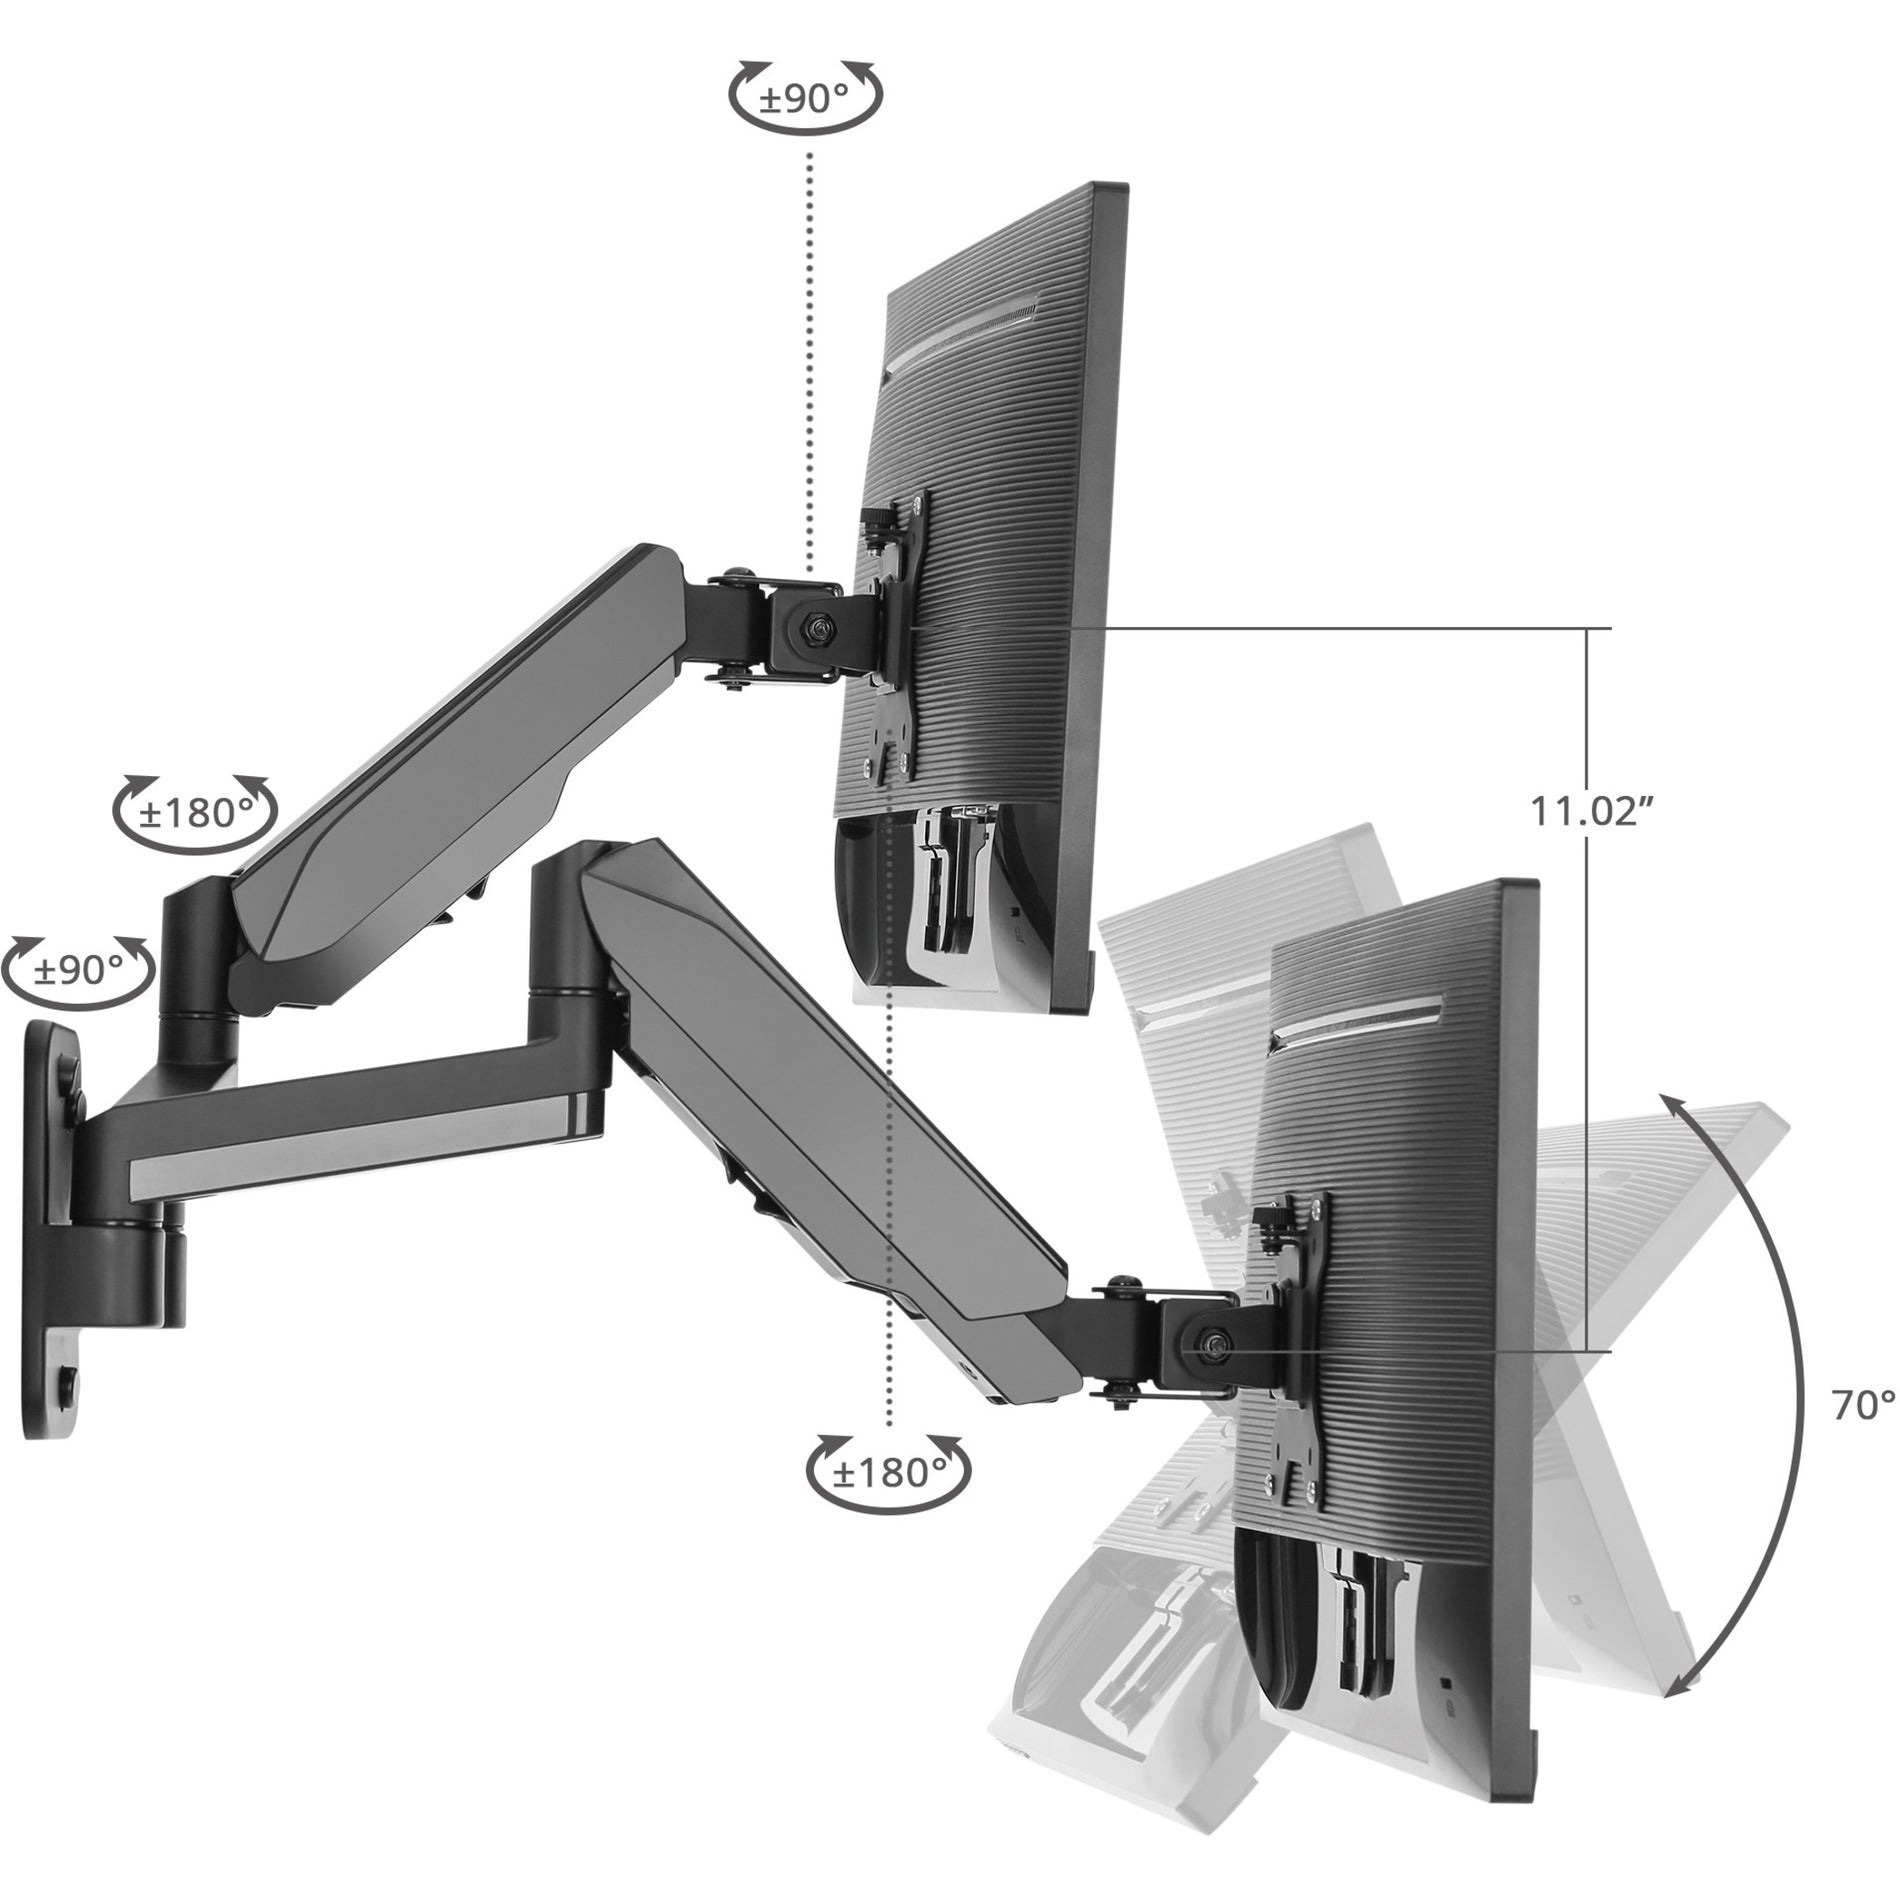 SIIG CE-MT2M12-S1 High Premium Aluminum Gas Spring Wall Mount - Dual Monitor, Easily Adjust Height and Angle for Ergonomic Workspace